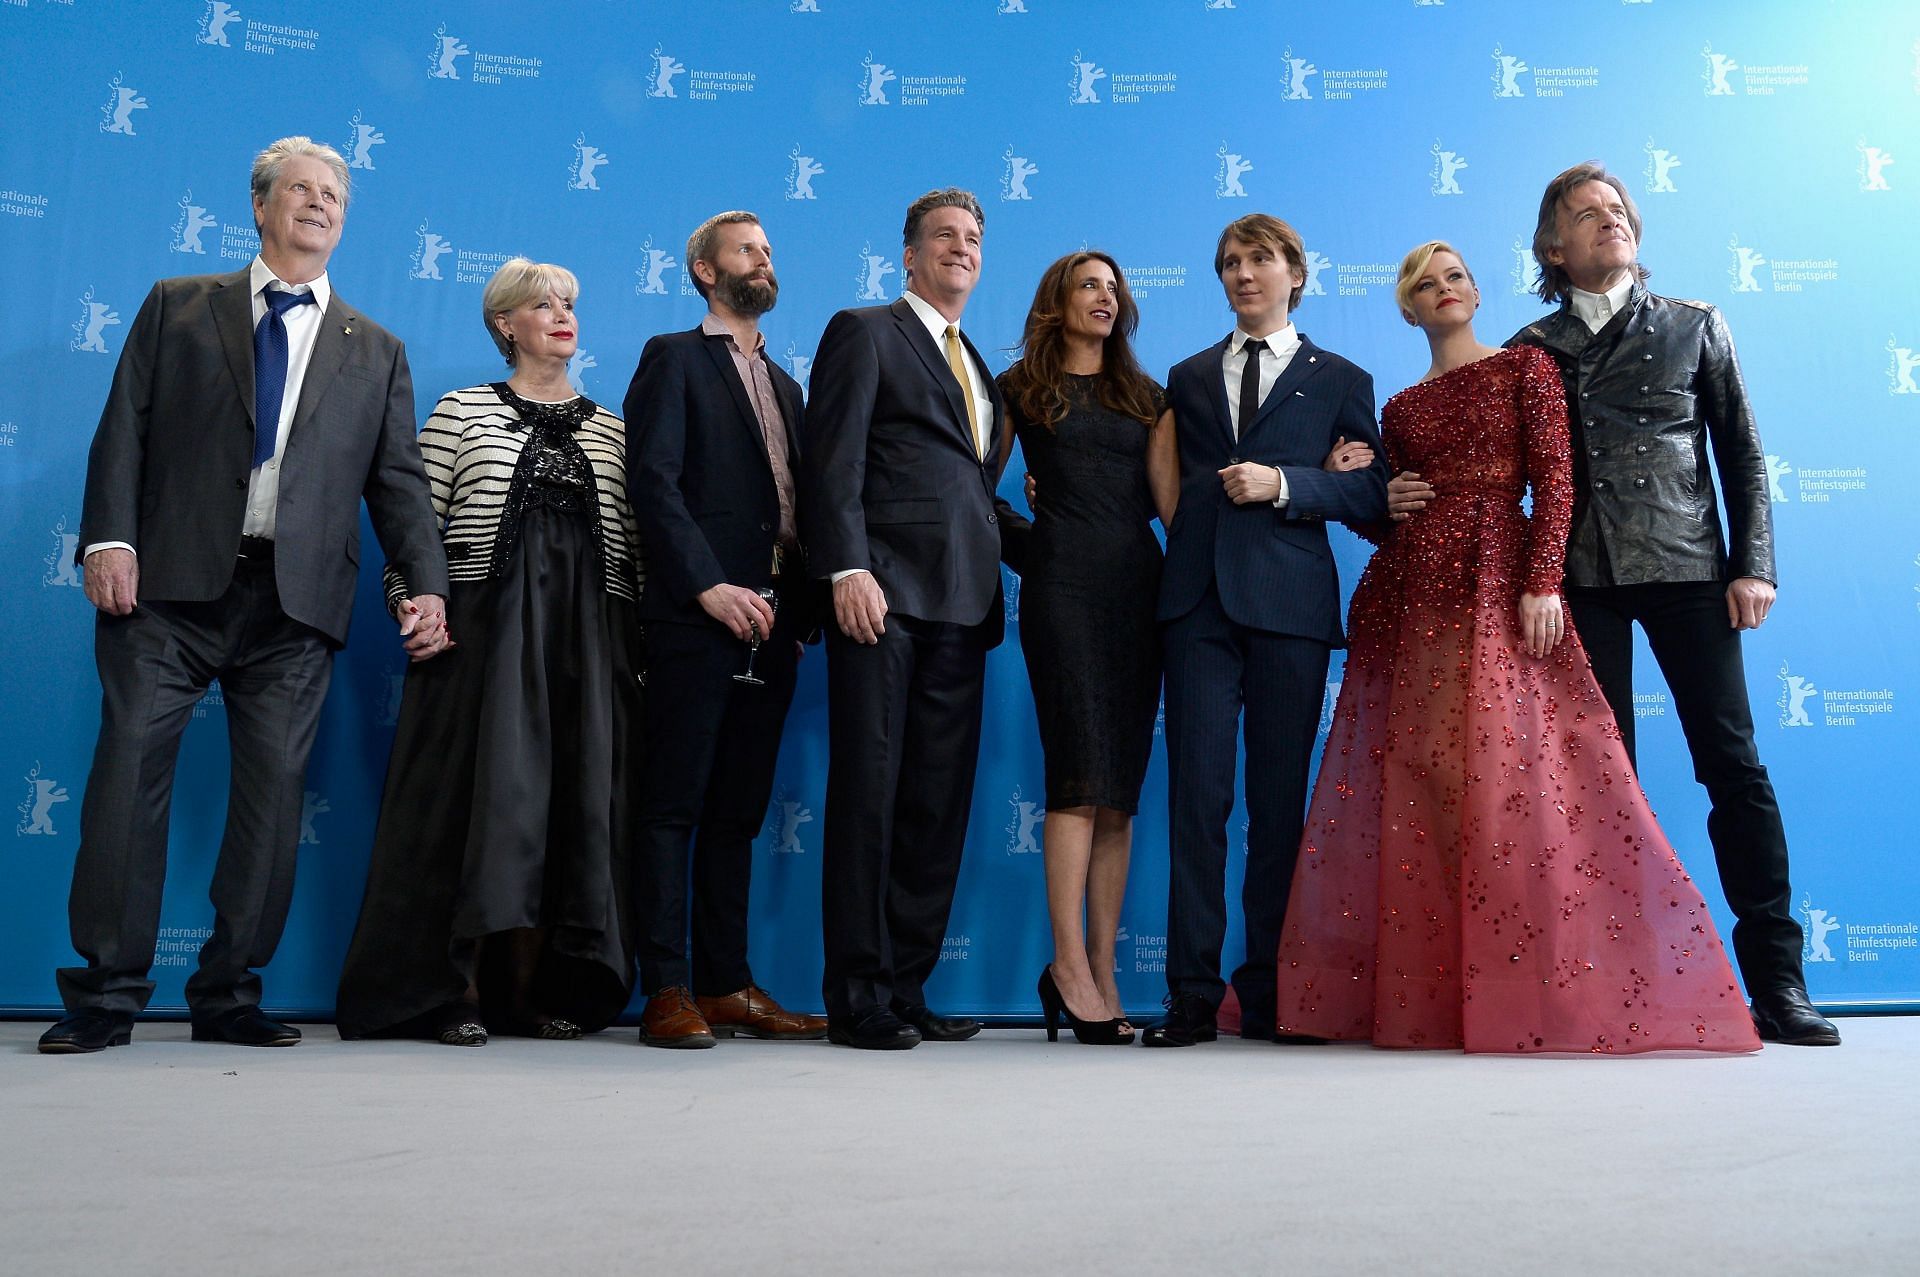 Ledbetter (second from left) attended the 65th Berlinale International Film Festival (Image via Getty)